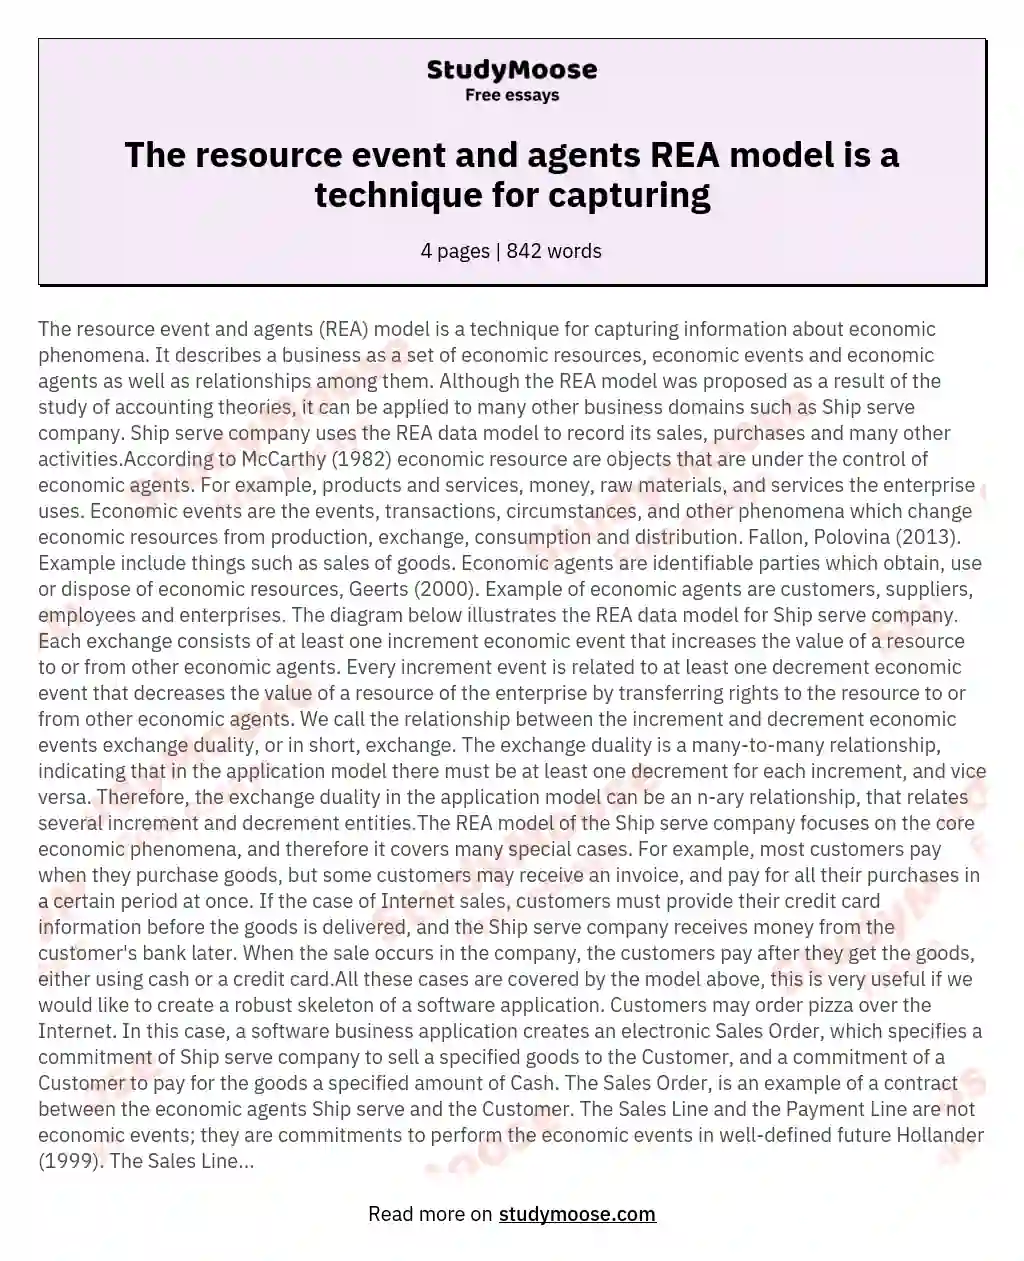 The resource event and agents REA model is a technique for capturing essay